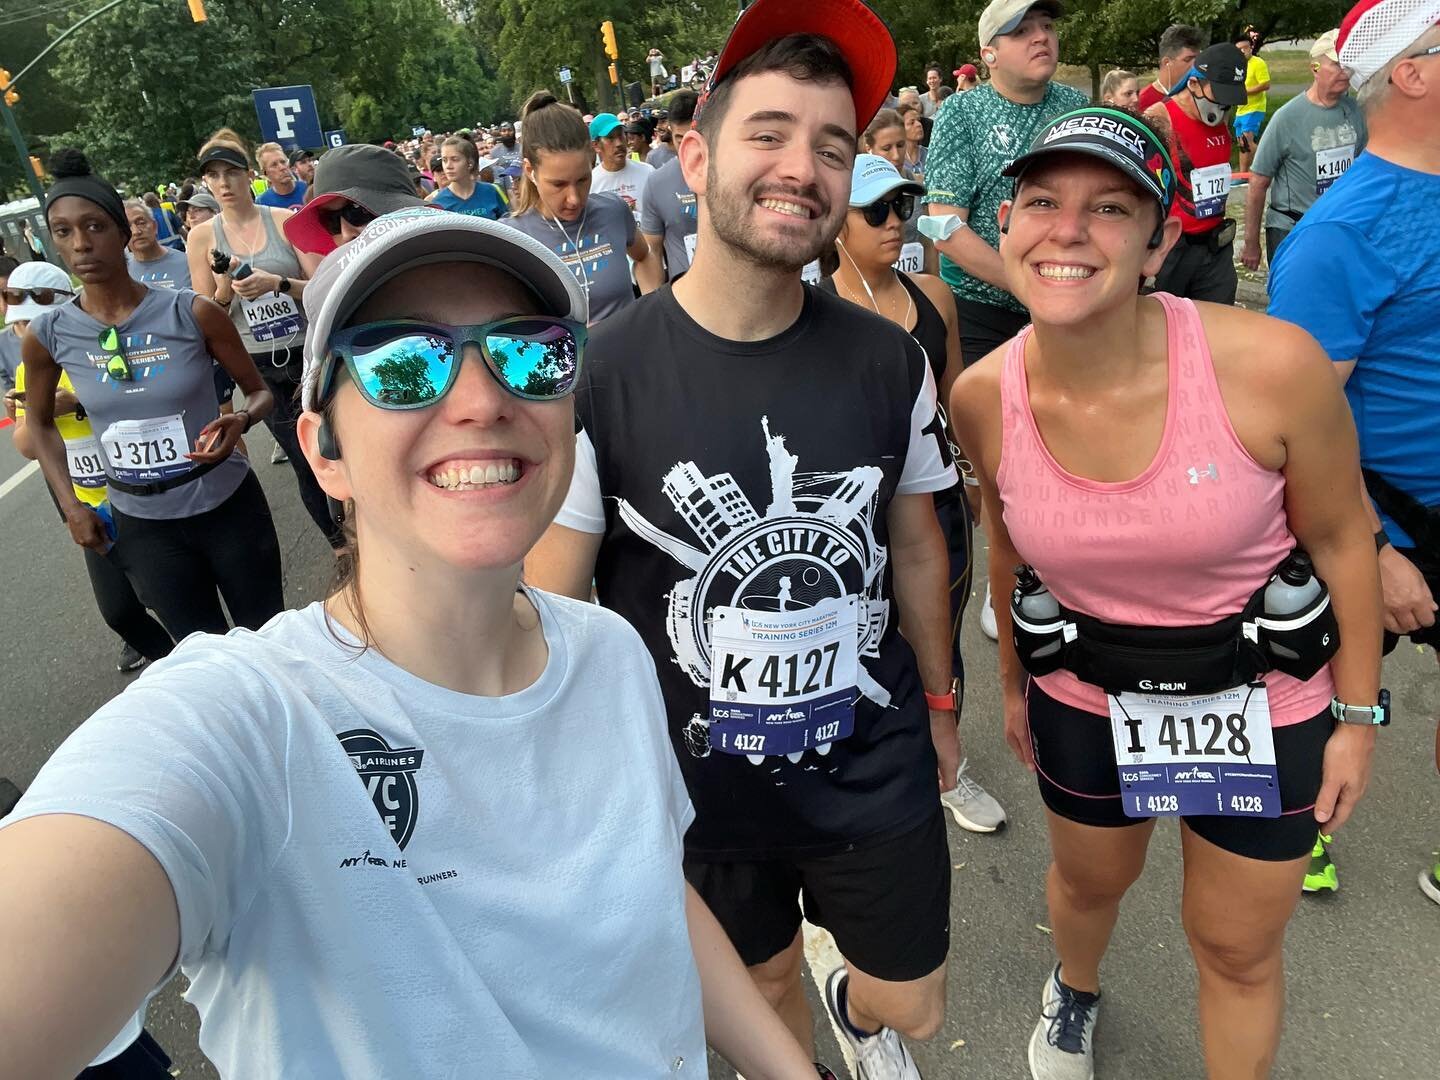 12 miles in the park with my friendsssss. Thanks for waiting for me guys!

It was hot and humid out there today! The kind of day where you grab two cups of water at every aid station, take an extra gel as you run, and are soaked head to toe by the ti